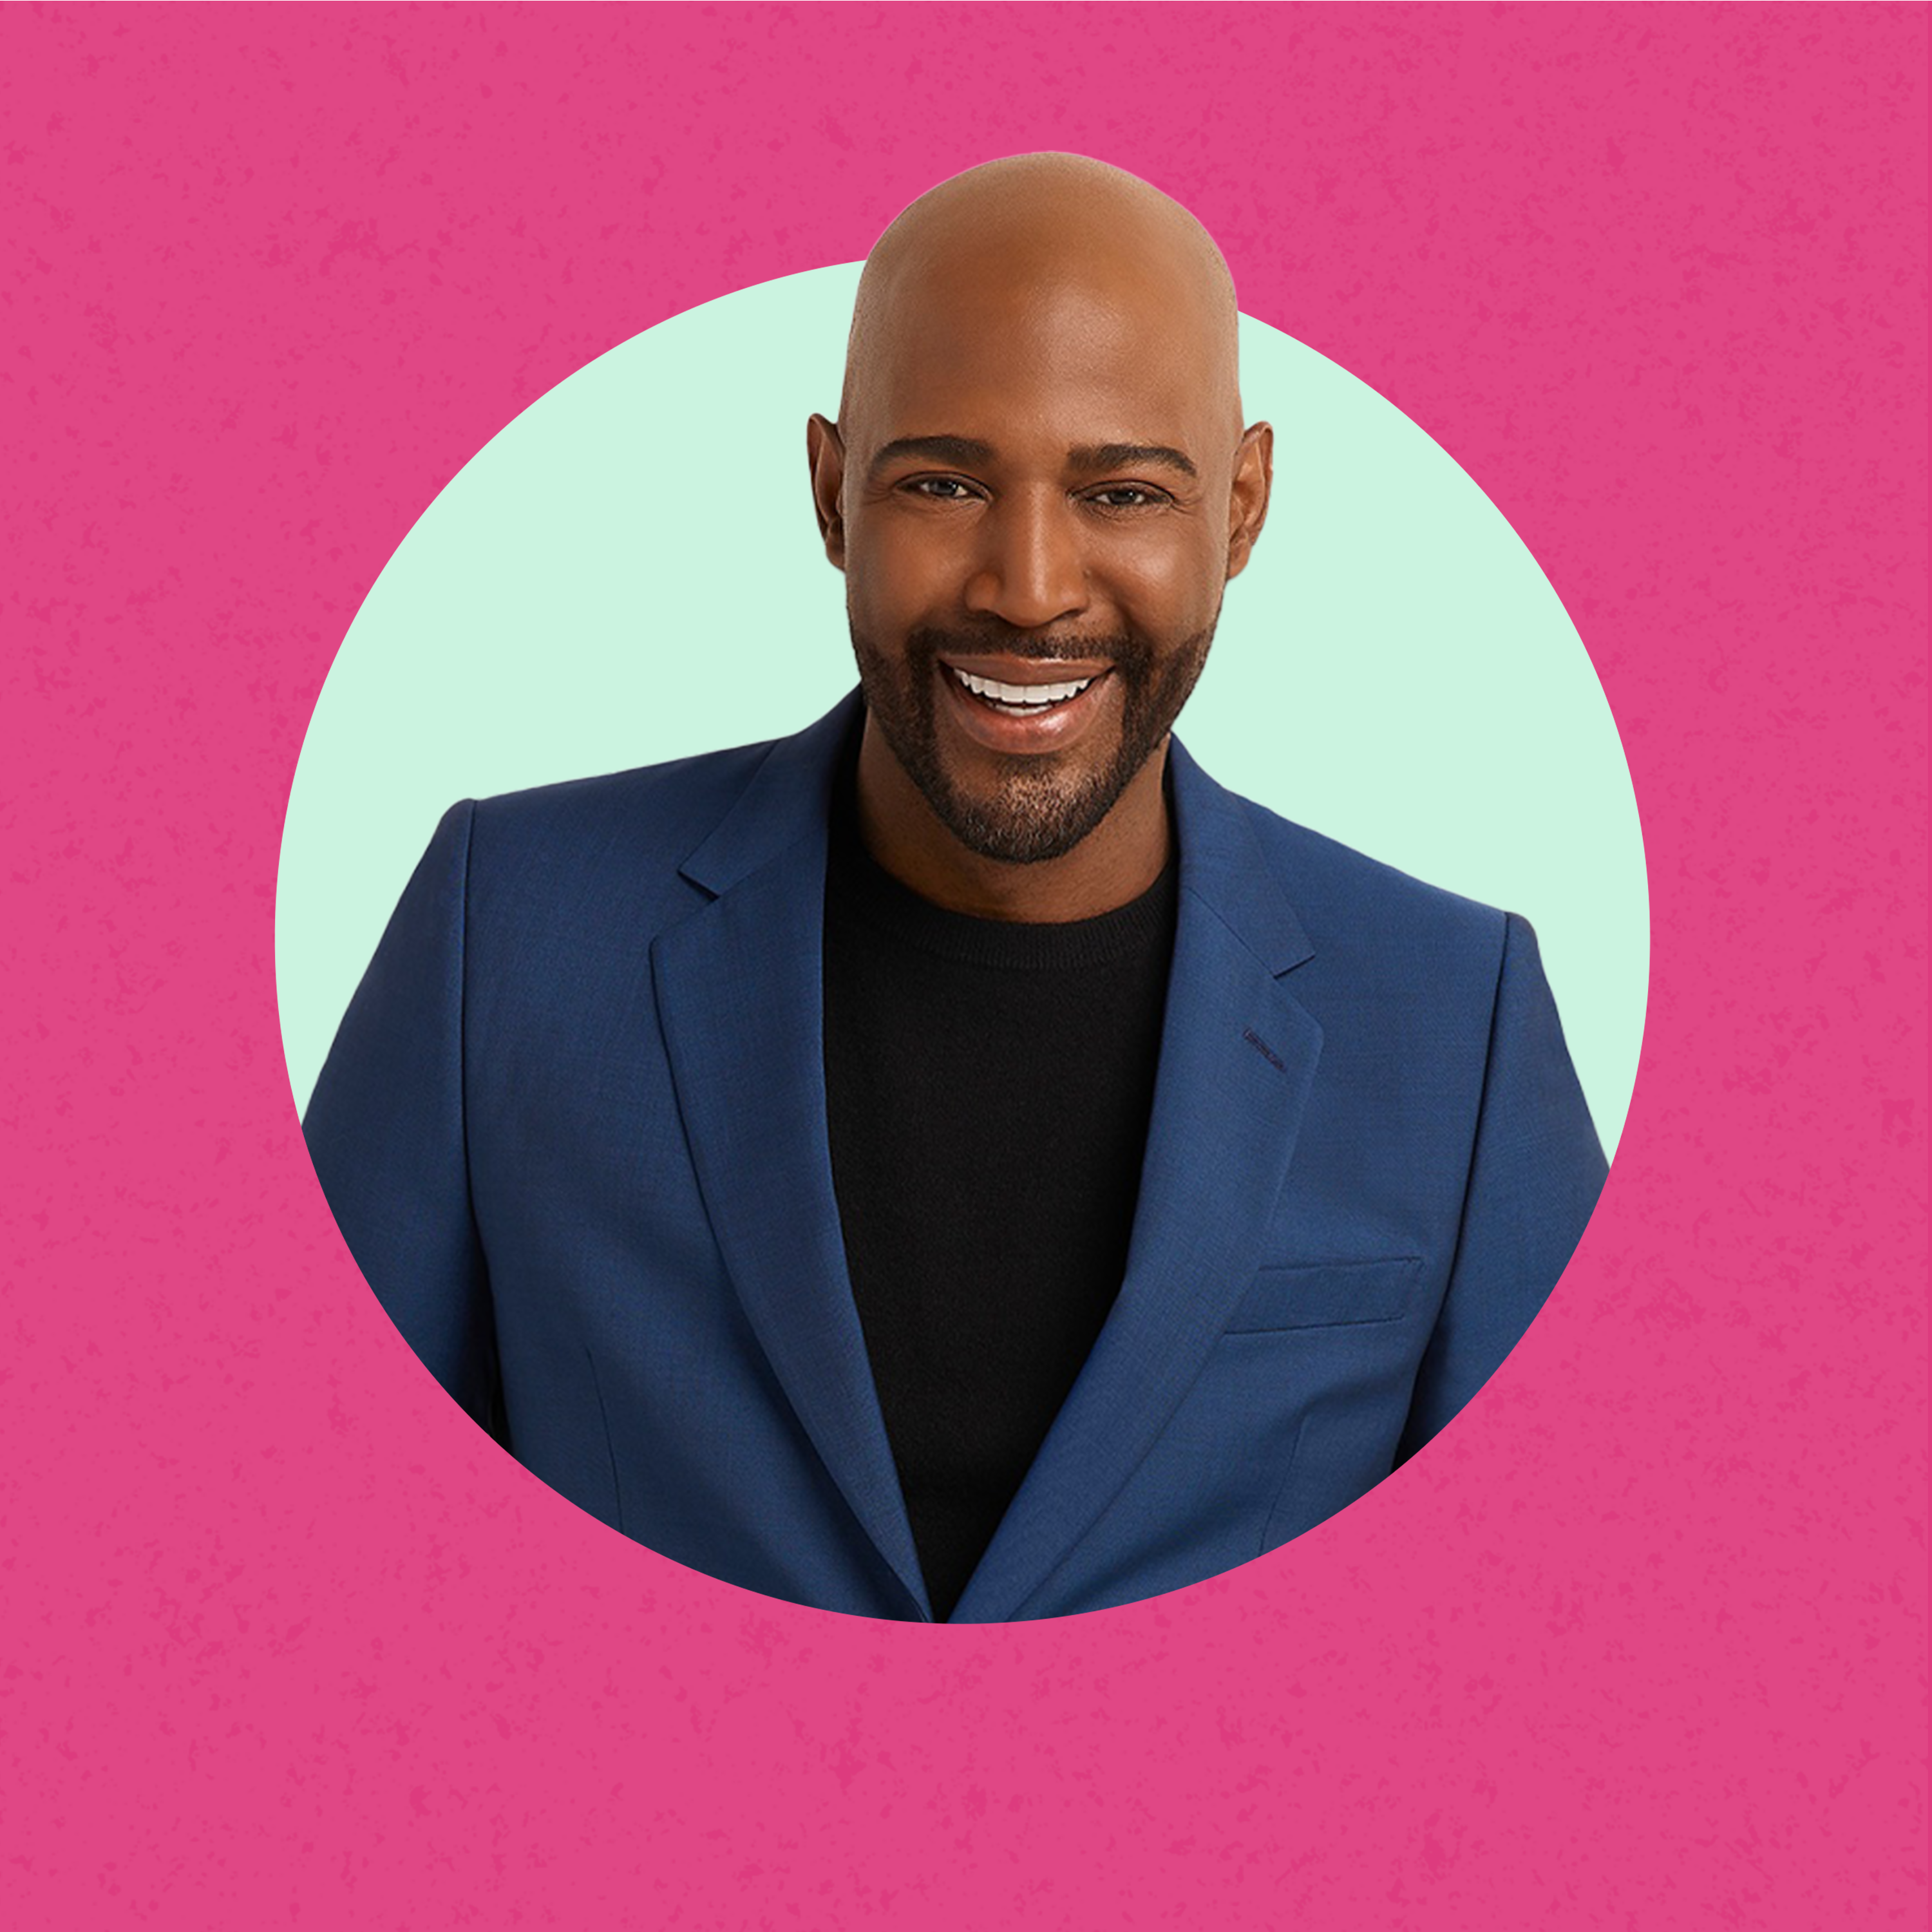 Choices We Made: Live in Fear or Love? (with Karamo)